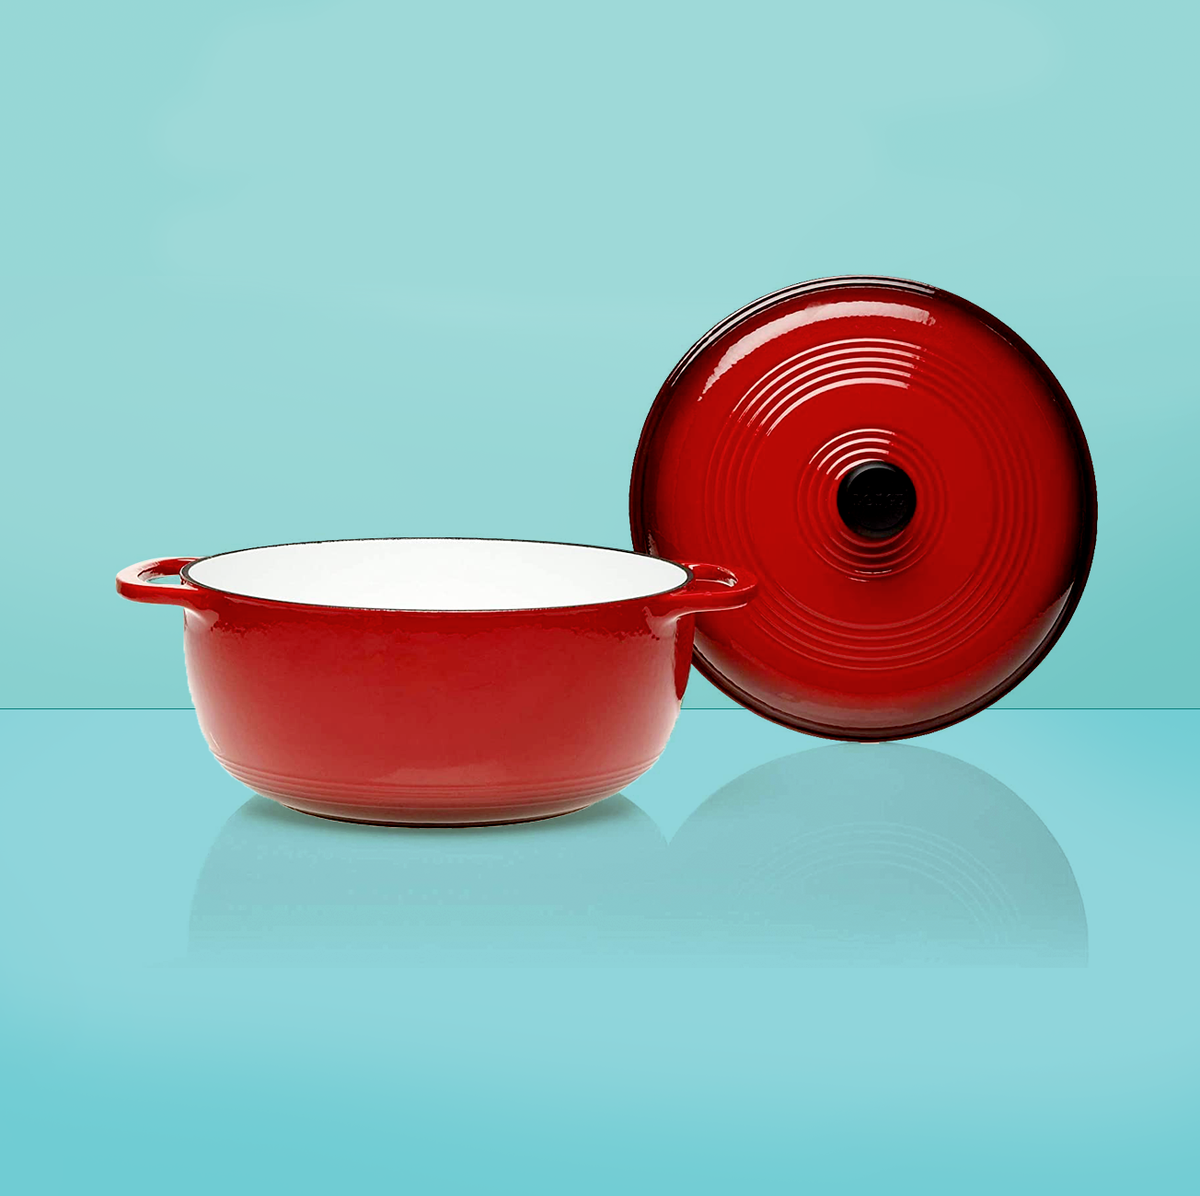 12 Things I Learned After Buying an Enameled Cast Iron Casserole